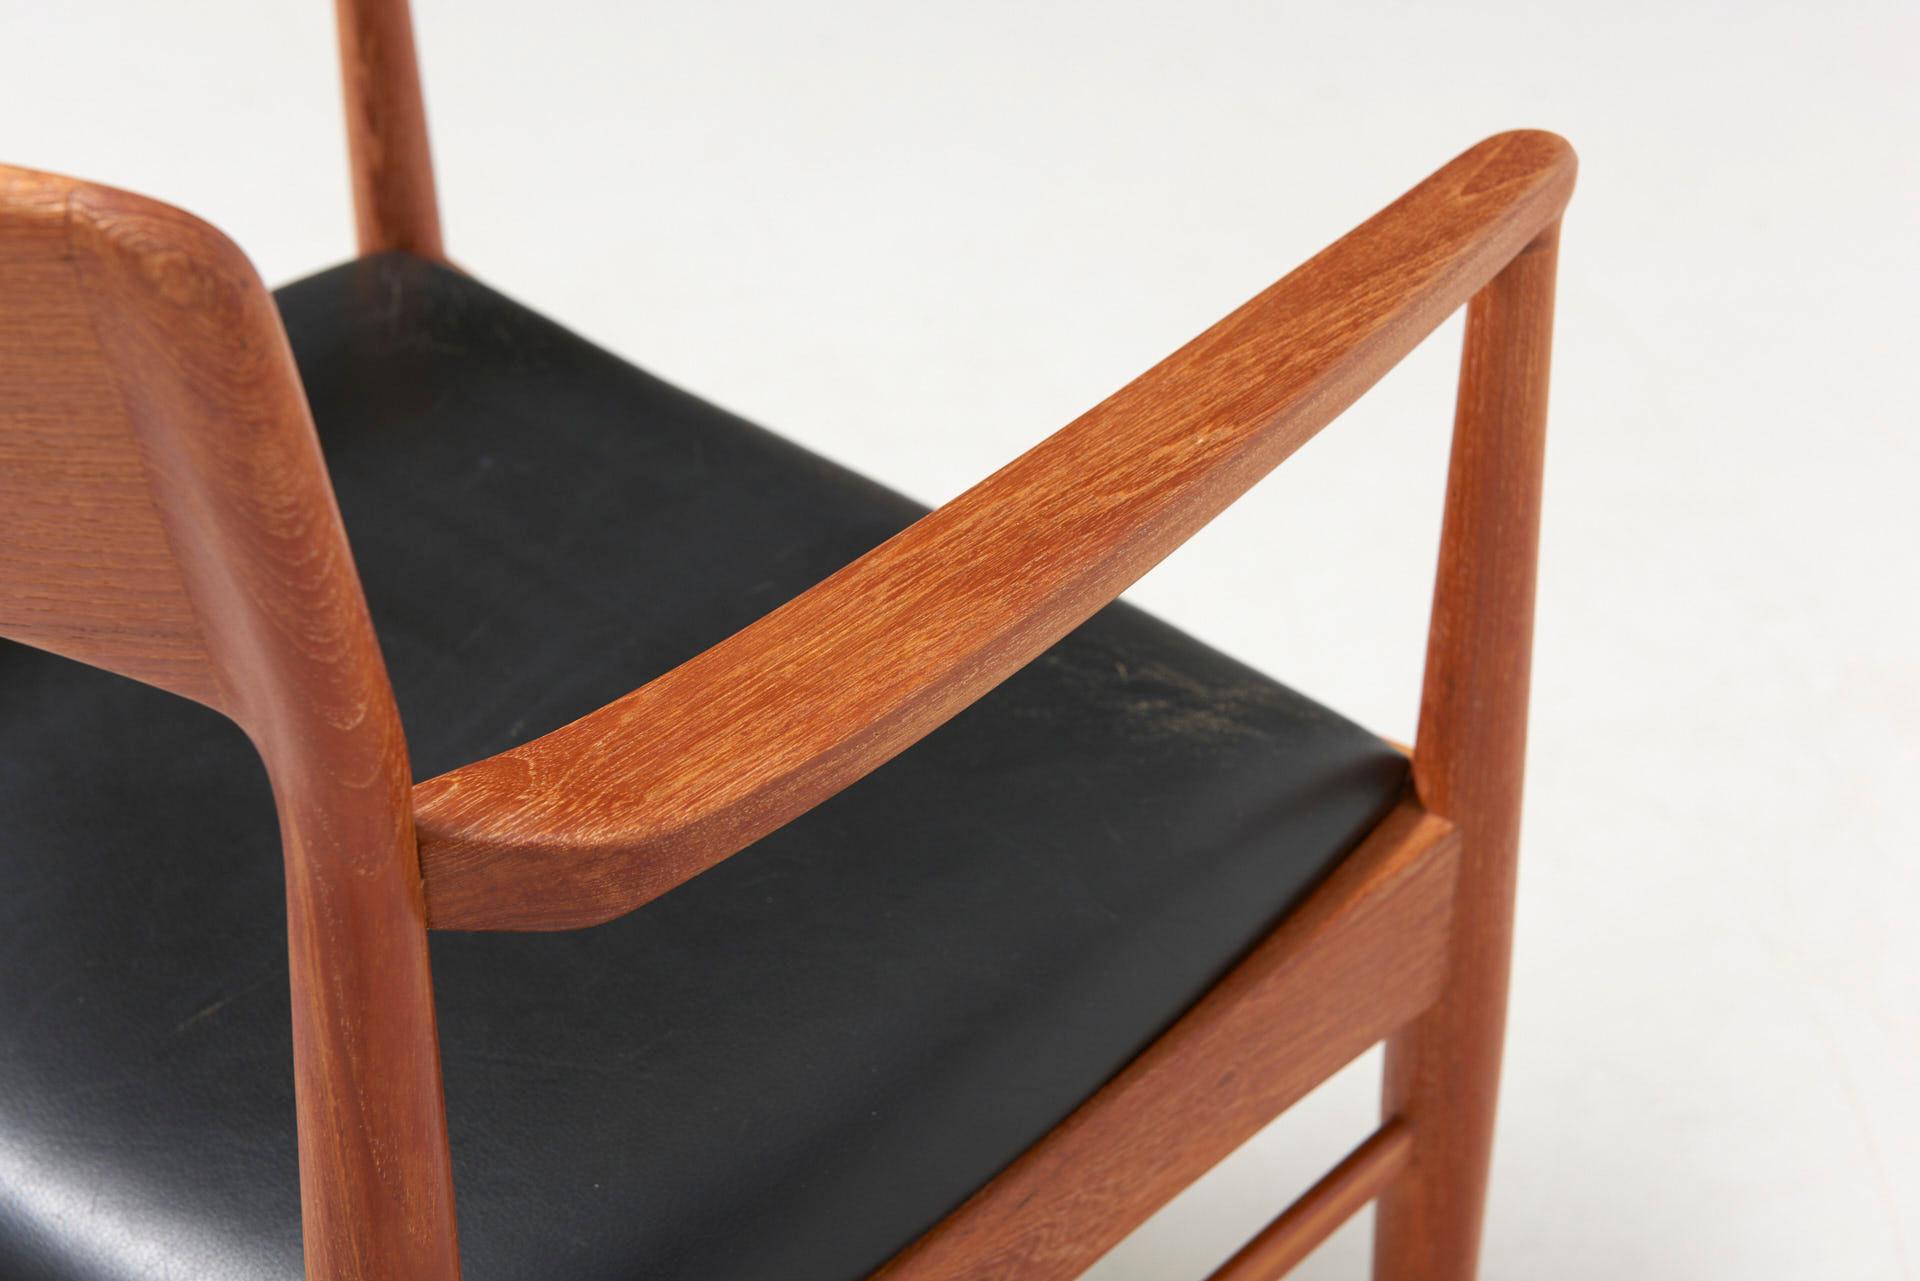 An armchair in teak made by K.S. Møbler. Original leather seat. Made in Denmark in the 1950s.